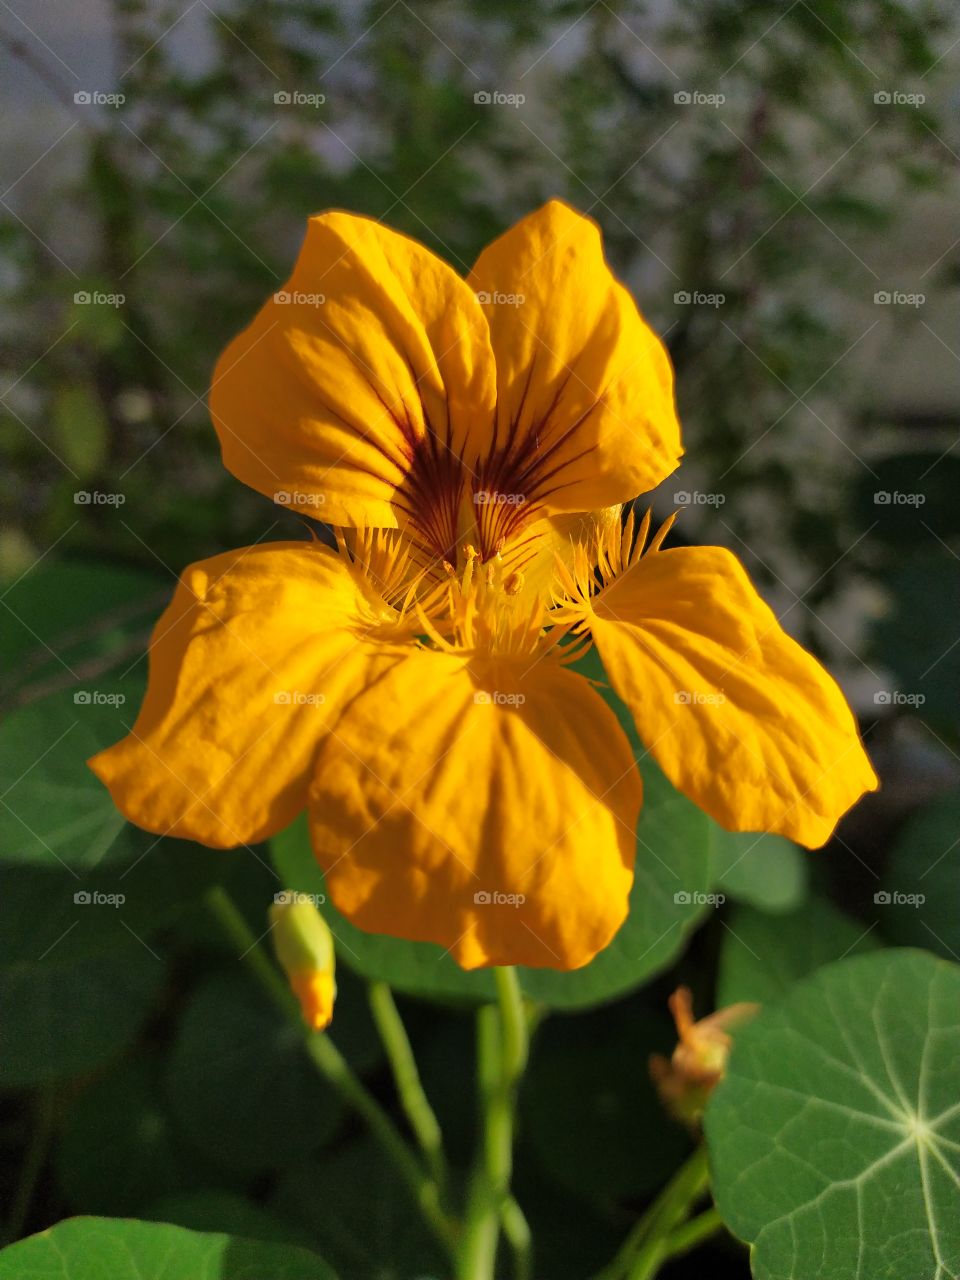 a special and lovely yellow capuchinha flower in the garden in a sunny day